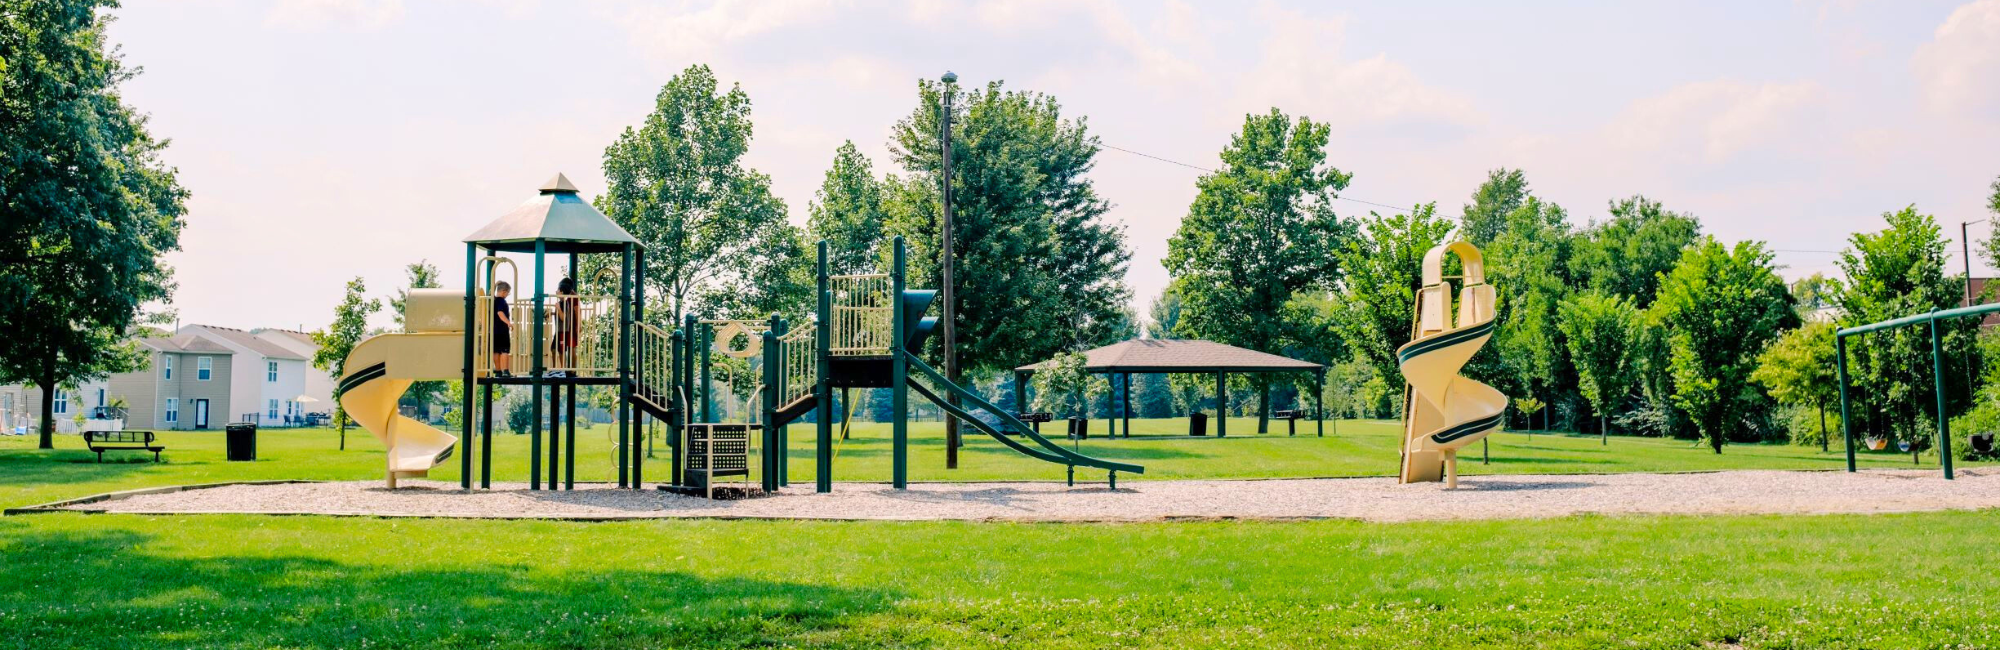 park in a neighborhood with a playground and a shelter